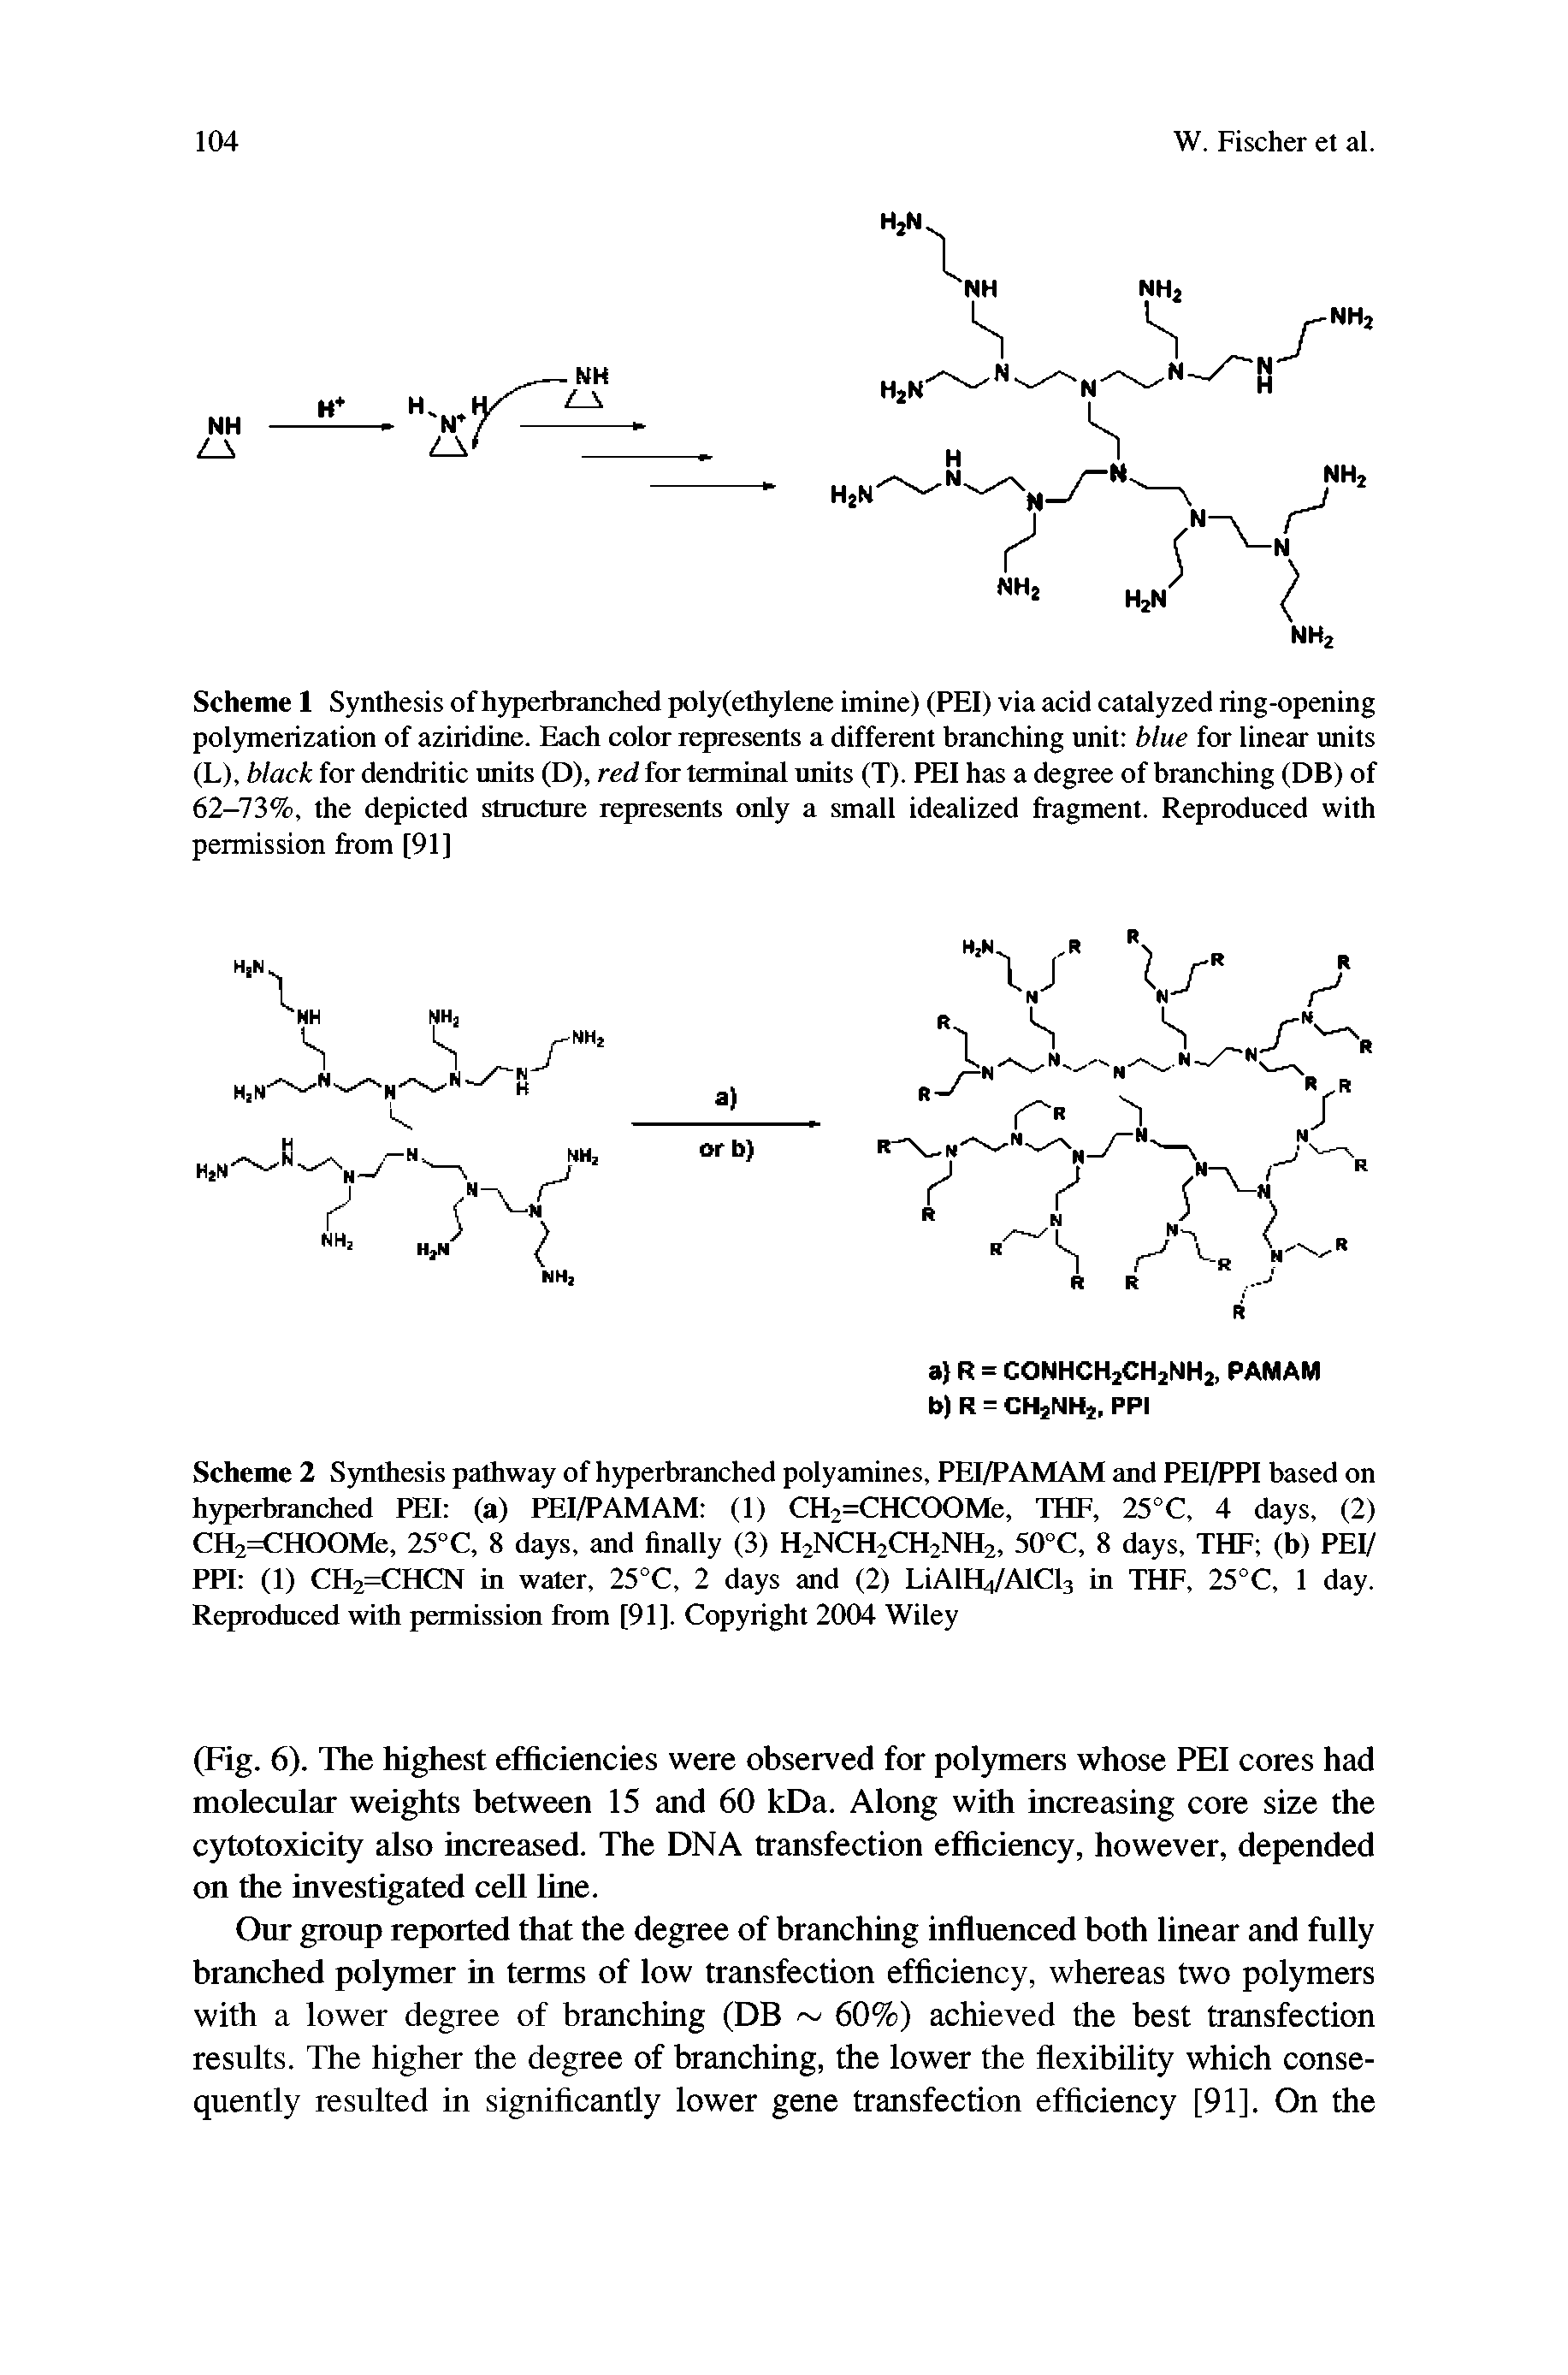 Scheme 2 Synthesis pathway of hyperbranched polyamines, PEI/PAMAM and PEI/PPI based on hyperbranched PEI (a) PEI/PAMAM (1) CH2=CHCOOMe, THF, 25°C, 4 days, (2) CH2=CHOOMe, 25°C, 8 days, and finally (3) H2NCH2CH2NH2, 50°C, 8 days, THF (b) PEI/ PPI (1) CH2=CHCN in water, 25°C, 2 days and (2) LiAlfVAlCb, in THF, 25°C, 1 day. Reproduced with permission from [91]. Copyright 2004 Wiley...